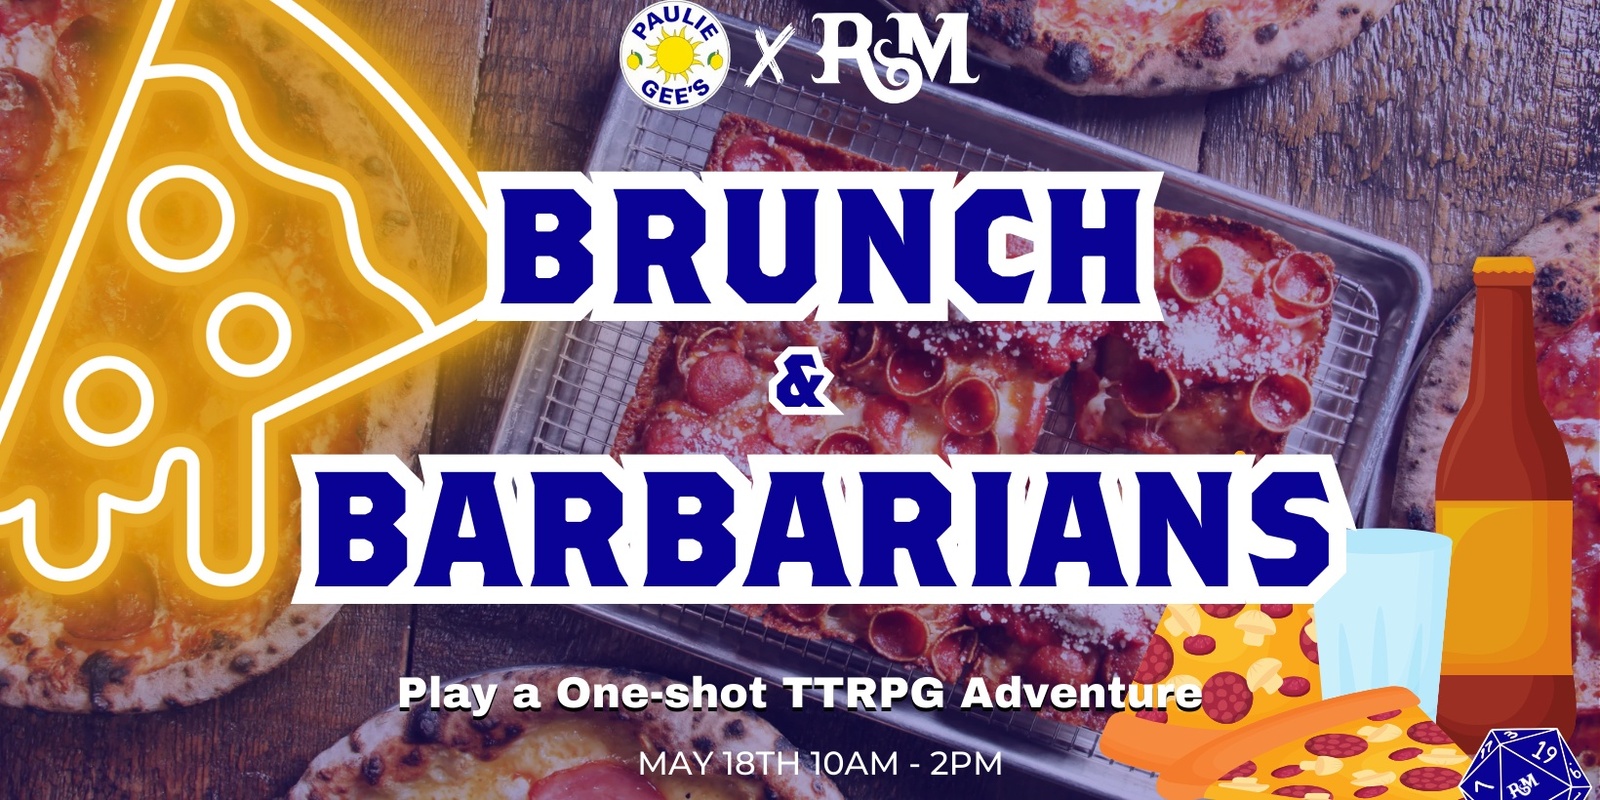 Banner image for Brunch & Barbarians at Paulie Gee's Logan Square